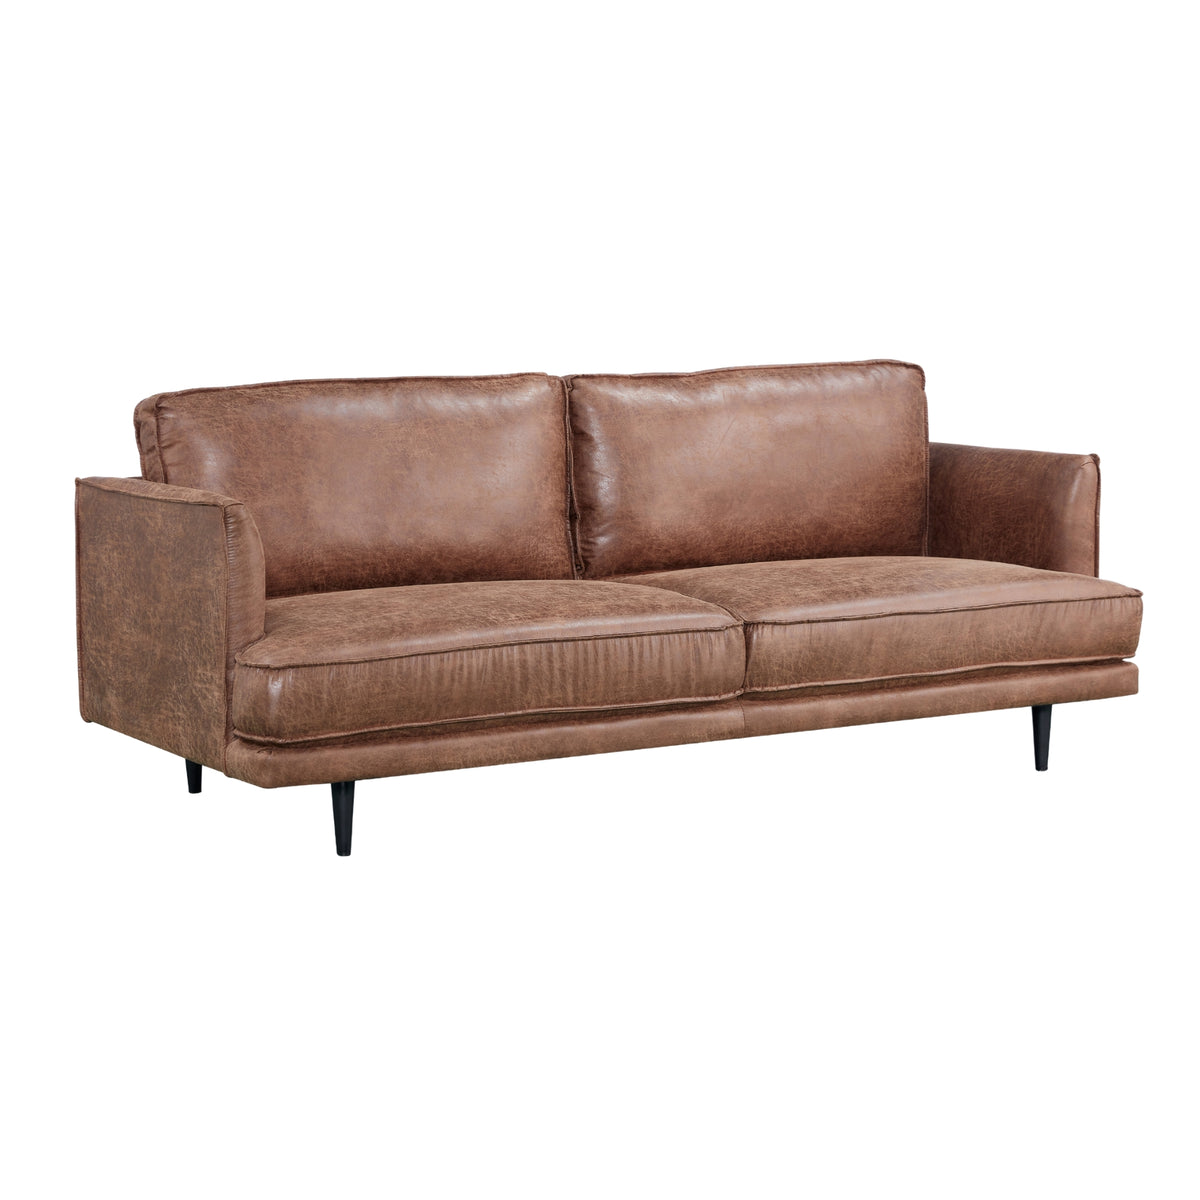 Rosie Fabric Sofa 3 Seater Brown